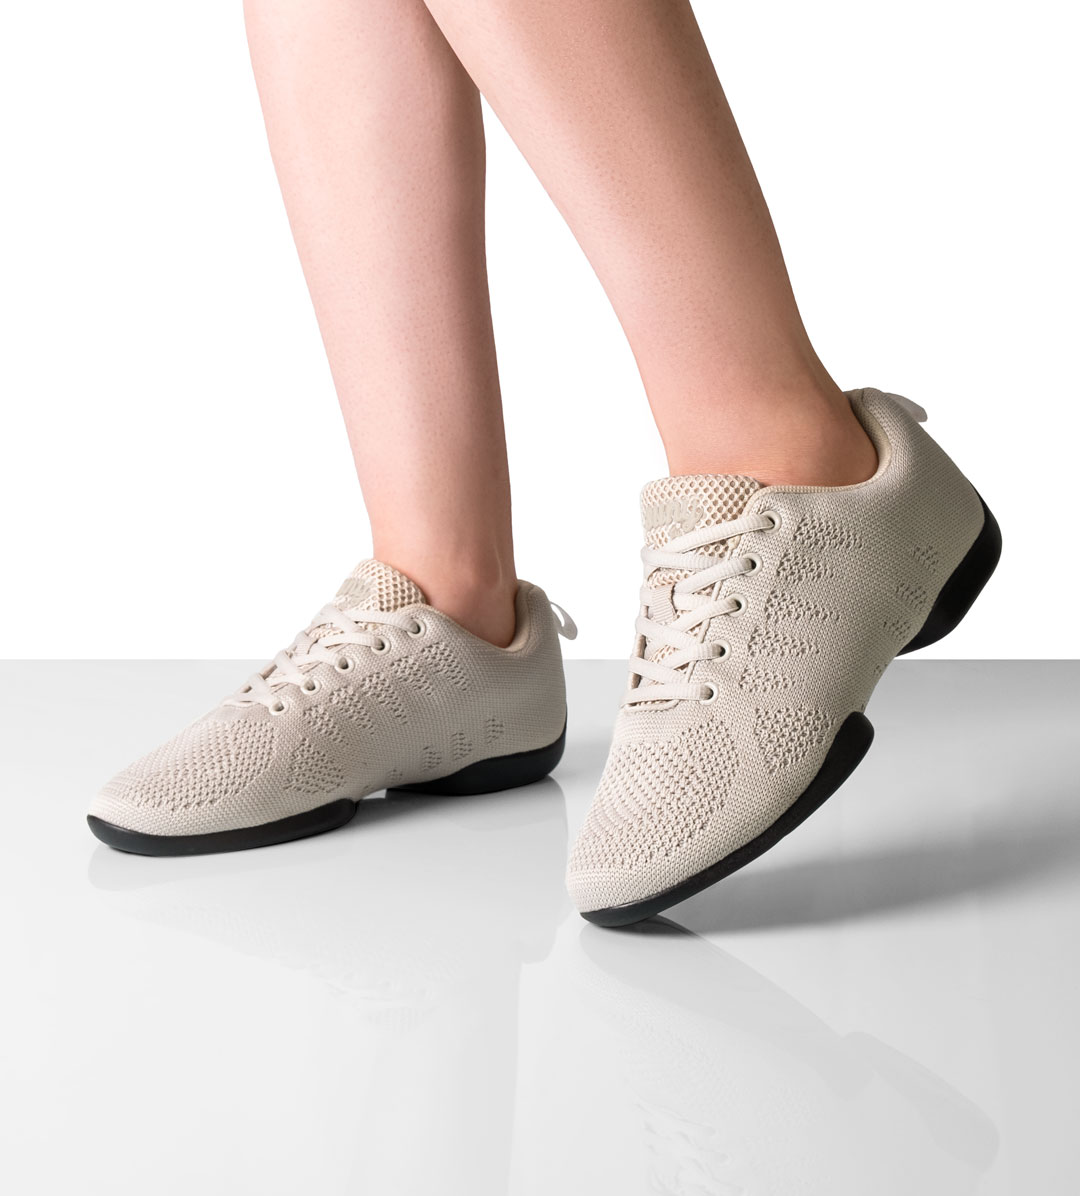 Women's dance sneaker 180 in Beige by Suny by Anna Kern, made of fine knitting material with split sole, ideal for dancing on all floors.